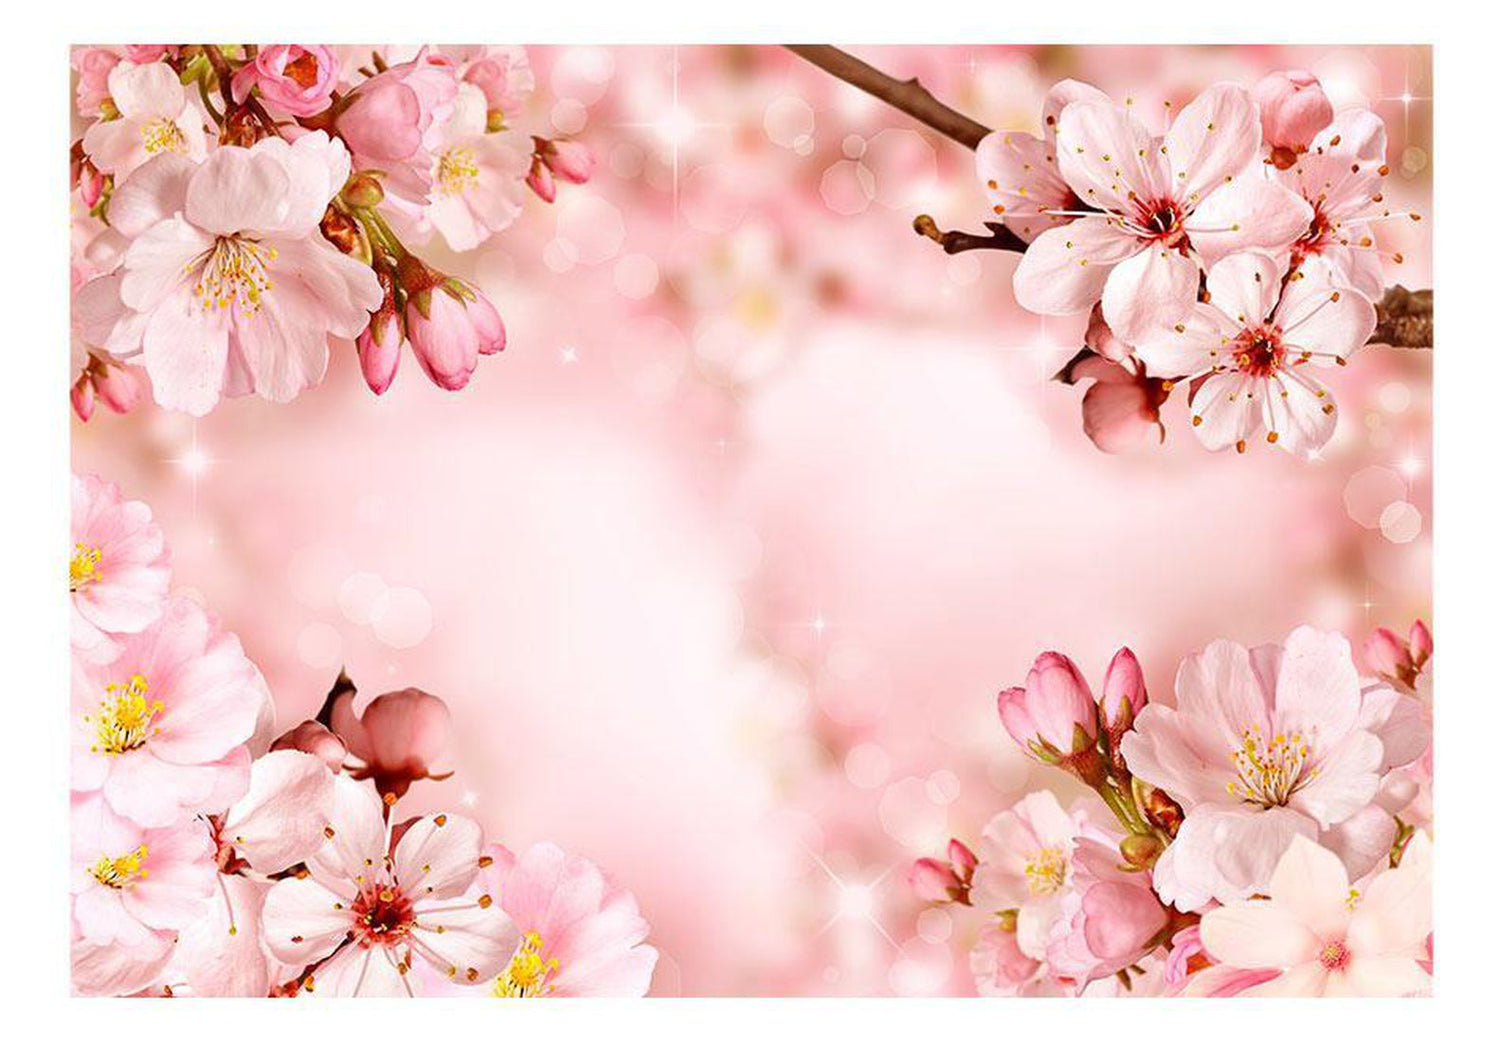 Peel and stick wall mural - Magical Cherry Blossom-TipTopHomeDecor